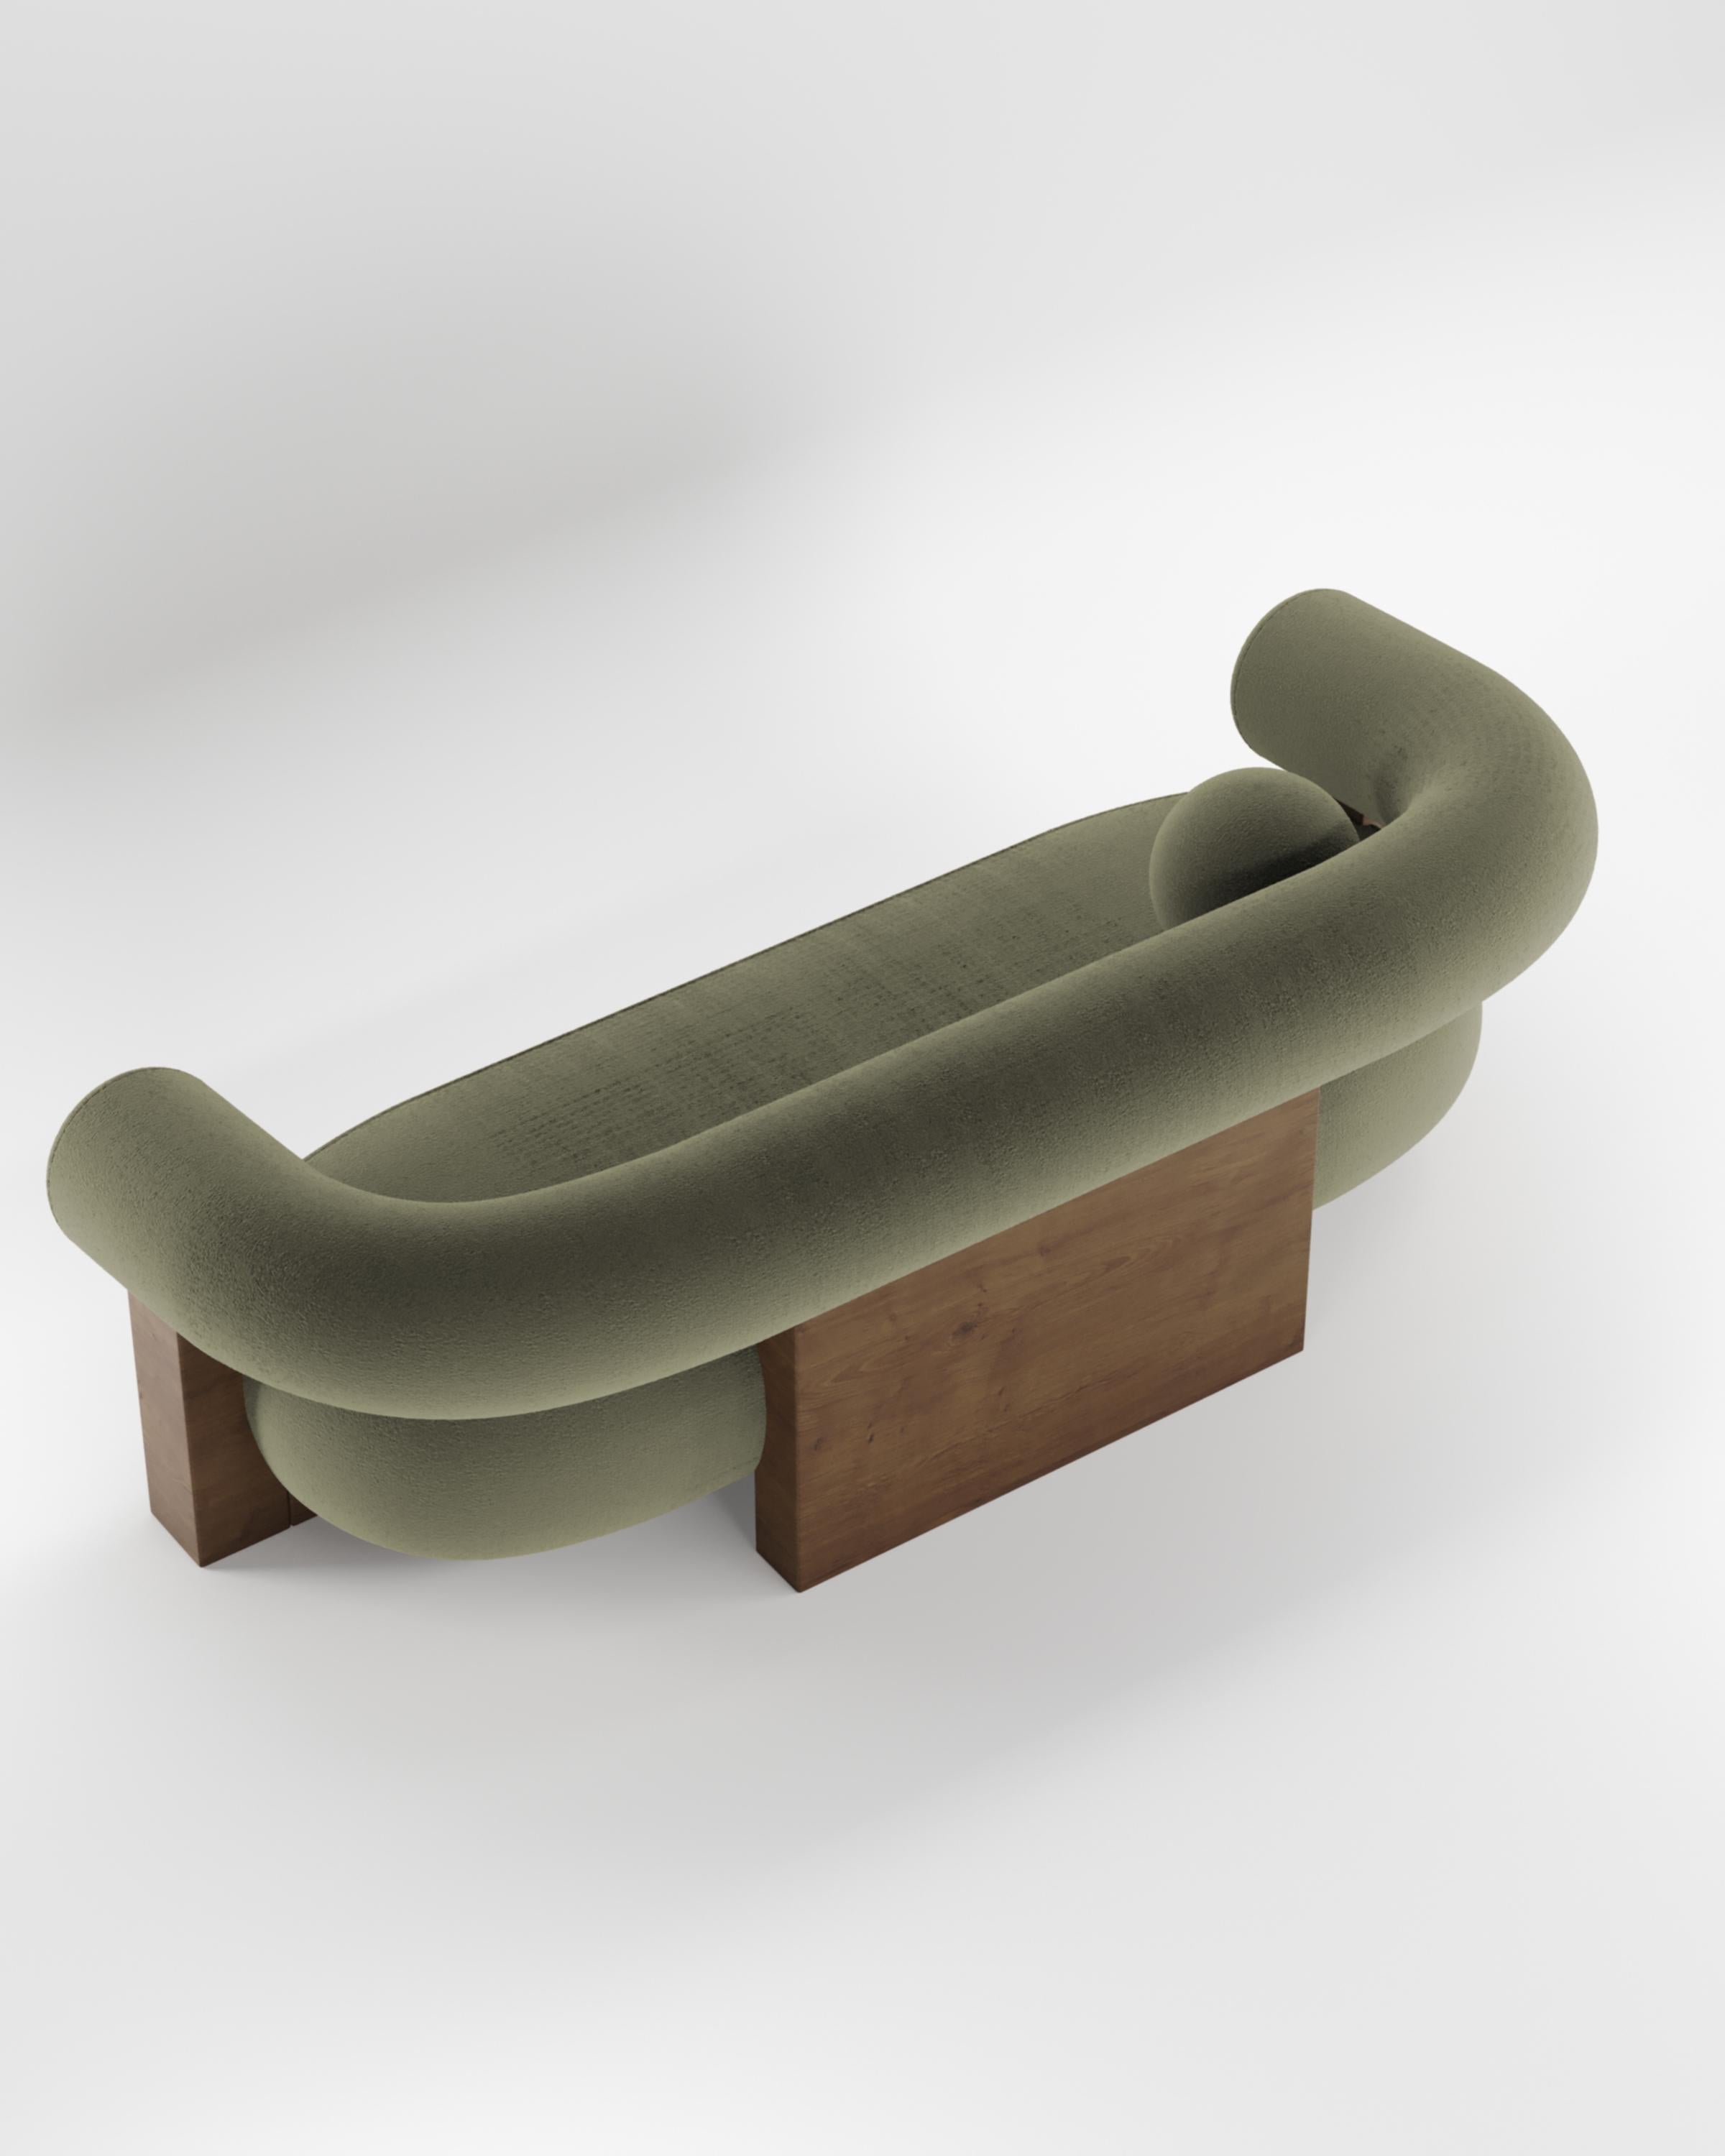 Fabric Contemporary Modern Cassete Sofa in Olive & Wood by Collector Studio For Sale